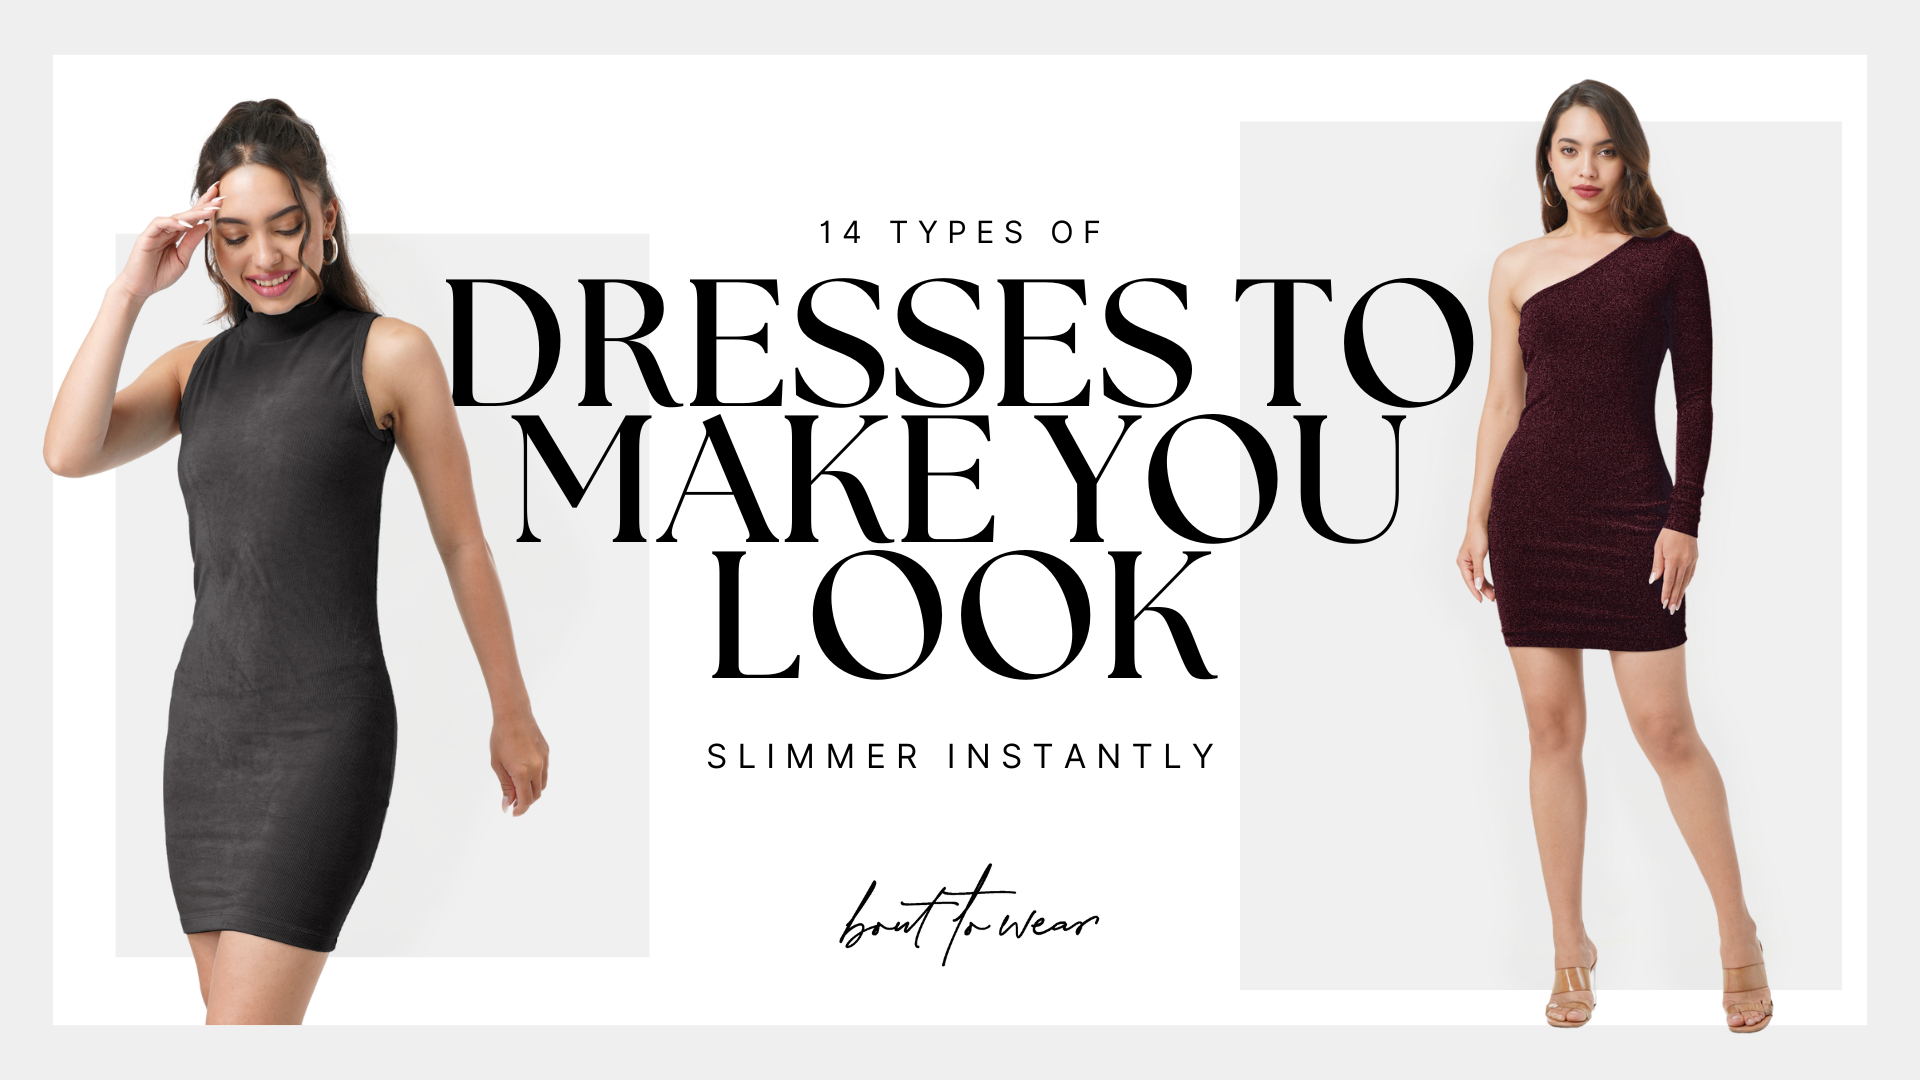 14 Types of Dresses to Make You Look Slimmer Instantly